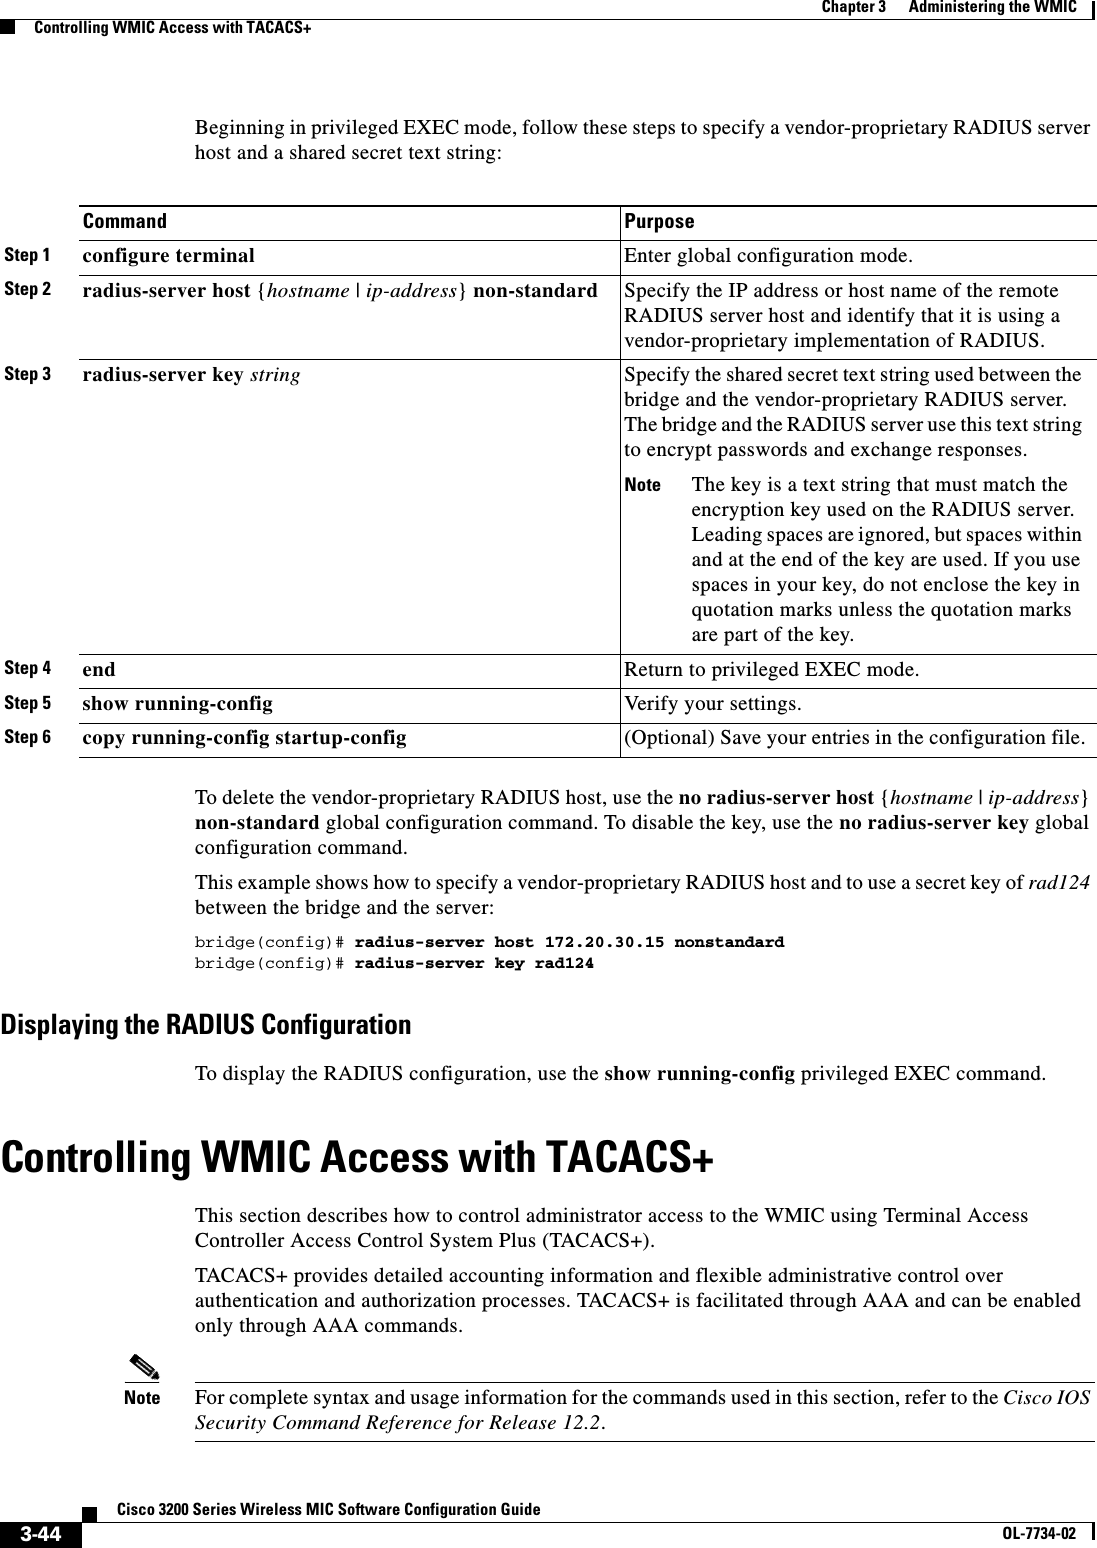 3-44Cisco 3200 Series Wireless MIC Software Configuration GuideOL-7734-02Chapter 3      Administering the WMICControlling WMIC Access with TACACS+Beginning in privileged EXEC mode, follow these steps to specify a vendor-proprietary RADIUS server host and a shared secret text string:To delete the vendor-proprietary RADIUS host, use the no radius-server host {hostname | ip-address}non-standard global configuration command. To disable the key, use the no radius-server key global configuration command.This example shows how to specify a vendor-proprietary RADIUS host and to use a secret key of rad124 between the bridge and the server:bridge(config)# radius-server host 172.20.30.15 nonstandardbridge(config)# radius-server key rad124Displaying the RADIUS ConfigurationTo display the RADIUS configuration, use the show running-config privileged EXEC command.Controlling WMIC Access with TACACS+ This section describes how to control administrator access to the WMIC using Terminal Access Controller Access Control System Plus (TACACS+). TACACS+ provides detailed accounting information and flexible administrative control over authentication and authorization processes. TACACS+ is facilitated through AAA and can be enabled only through AAA commands.Note For complete syntax and usage information for the commands used in this section, refer to the Cisco IOS Security Command Reference for Release 12.2.Command PurposeStep 1 configure terminal Enter global configuration mode.Step 2 radius-server host {hostname | ip-address} non-standard  Specify the IP address or host name of the remote RADIUS server host and identify that it is using a vendor-proprietary implementation of RADIUS.Step 3 radius-server key string Specify the shared secret text string used between the bridge and the vendor-proprietary RADIUS server. The bridge and the RADIUS server use this text string to encrypt passwords and exchange responses.Note The key is a text string that must match the encryption key used on the RADIUS server. Leading spaces are ignored, but spaces within and at the end of the key are used. If you use spaces in your key, do not enclose the key in quotation marks unless the quotation marks are part of the key.Step 4 end Return to privileged EXEC mode.Step 5 show running-config Verify your settings.Step 6 copy running-config startup-config (Optional) Save your entries in the configuration file.